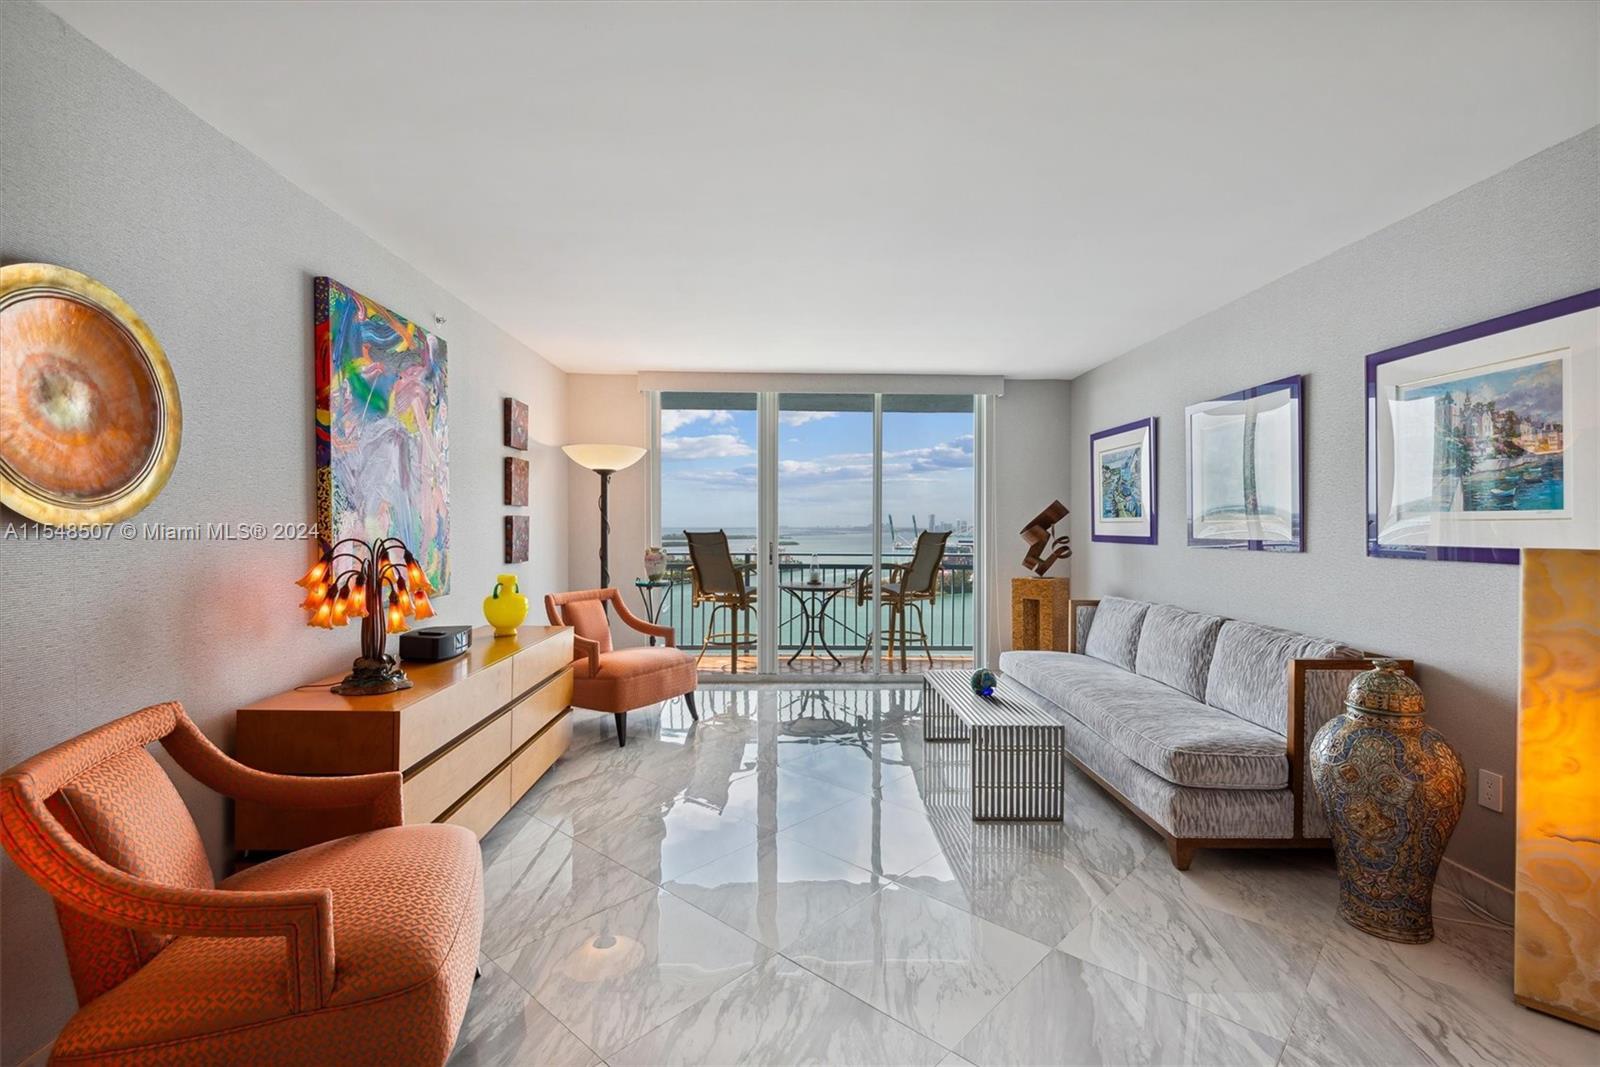 This fully renovated 2-bedroom unit in The Yacht Club at Portofino offers magnificent West views of 